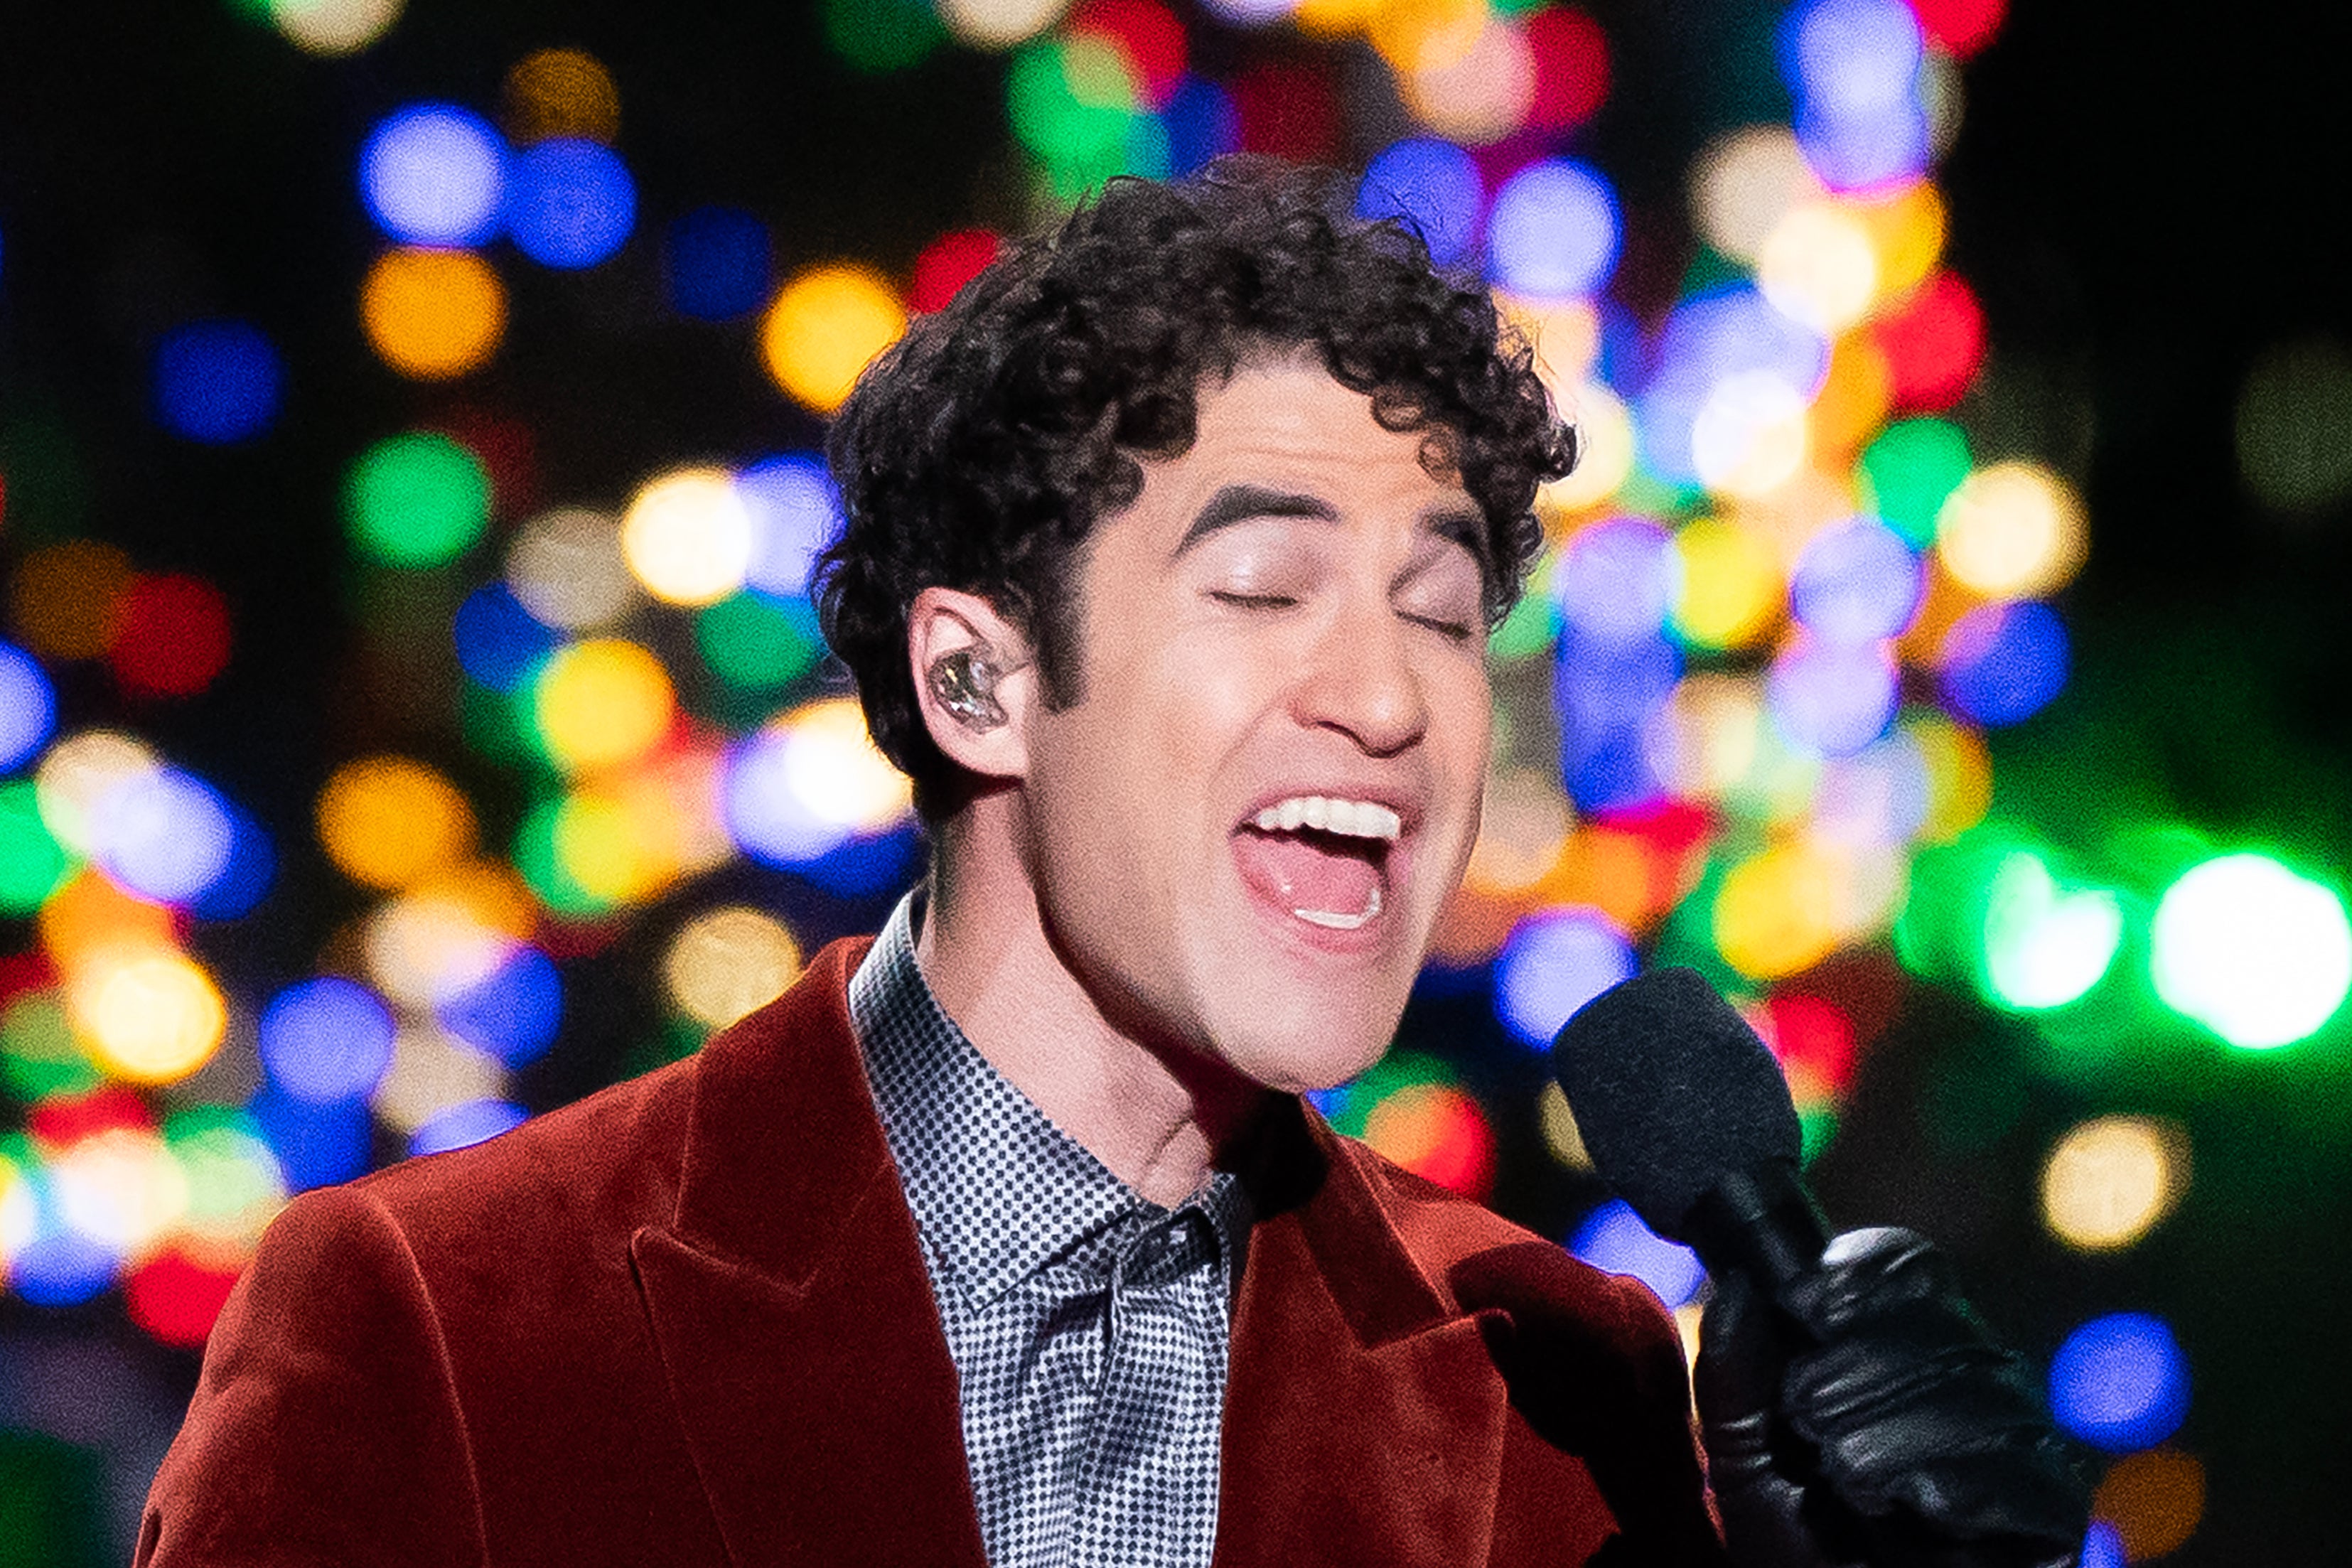 Criss this it? The ‘Glee’ star performing in November 2023